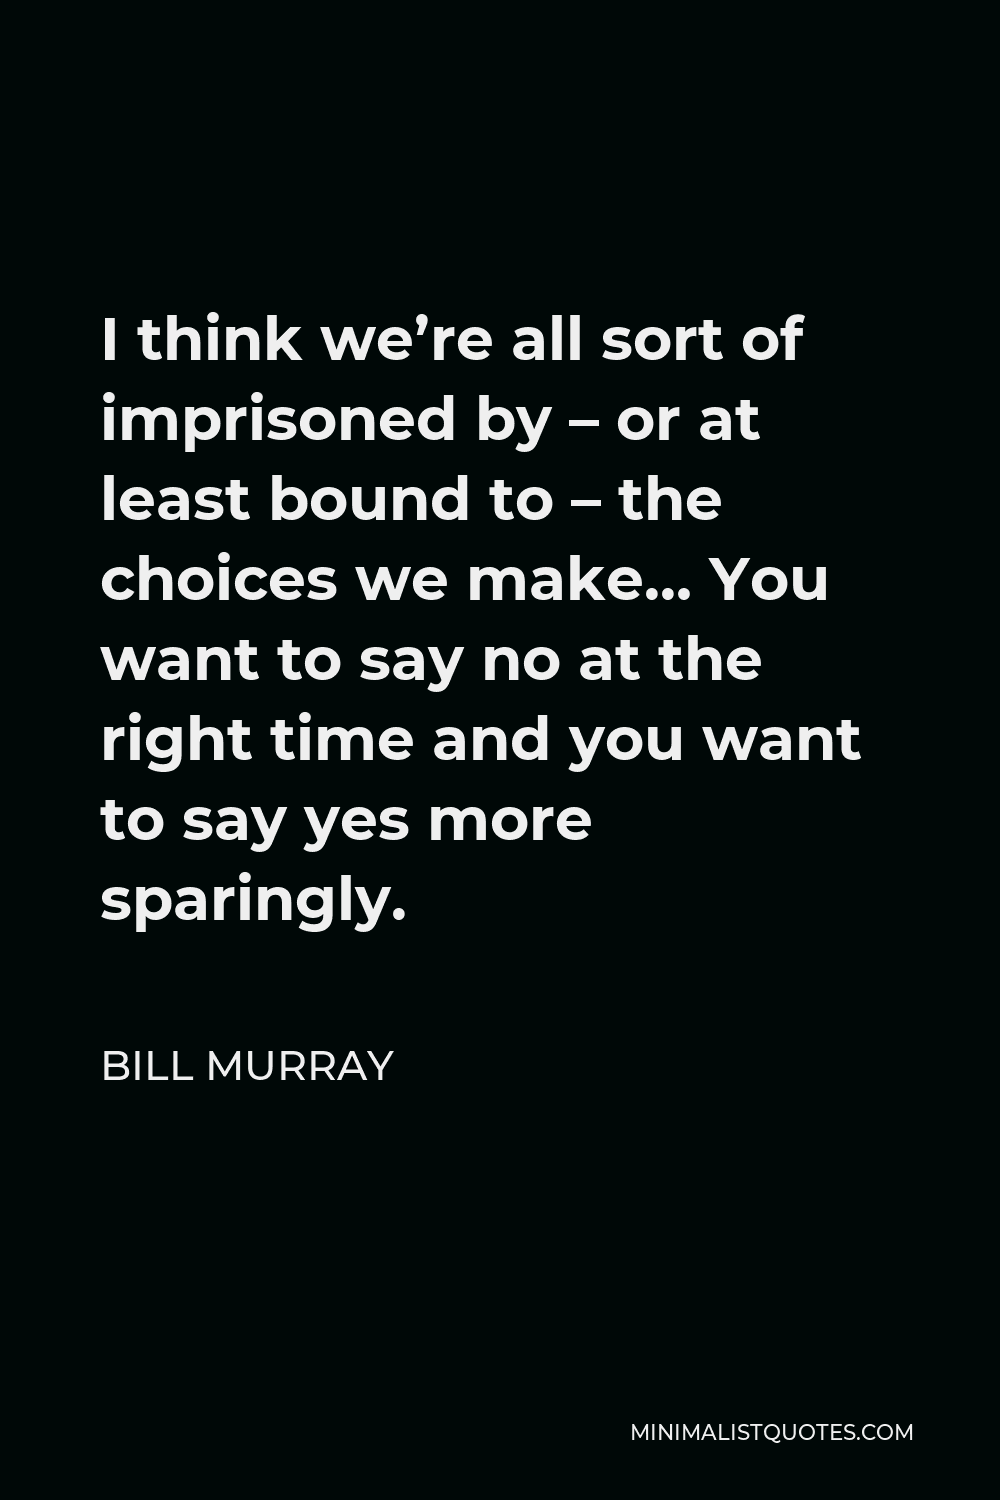 Bill Murray Quote - I think we’re all sort of imprisoned by – or at least bound to – the choices we make… You want to say no at the right time and you want to say yes more sparingly.